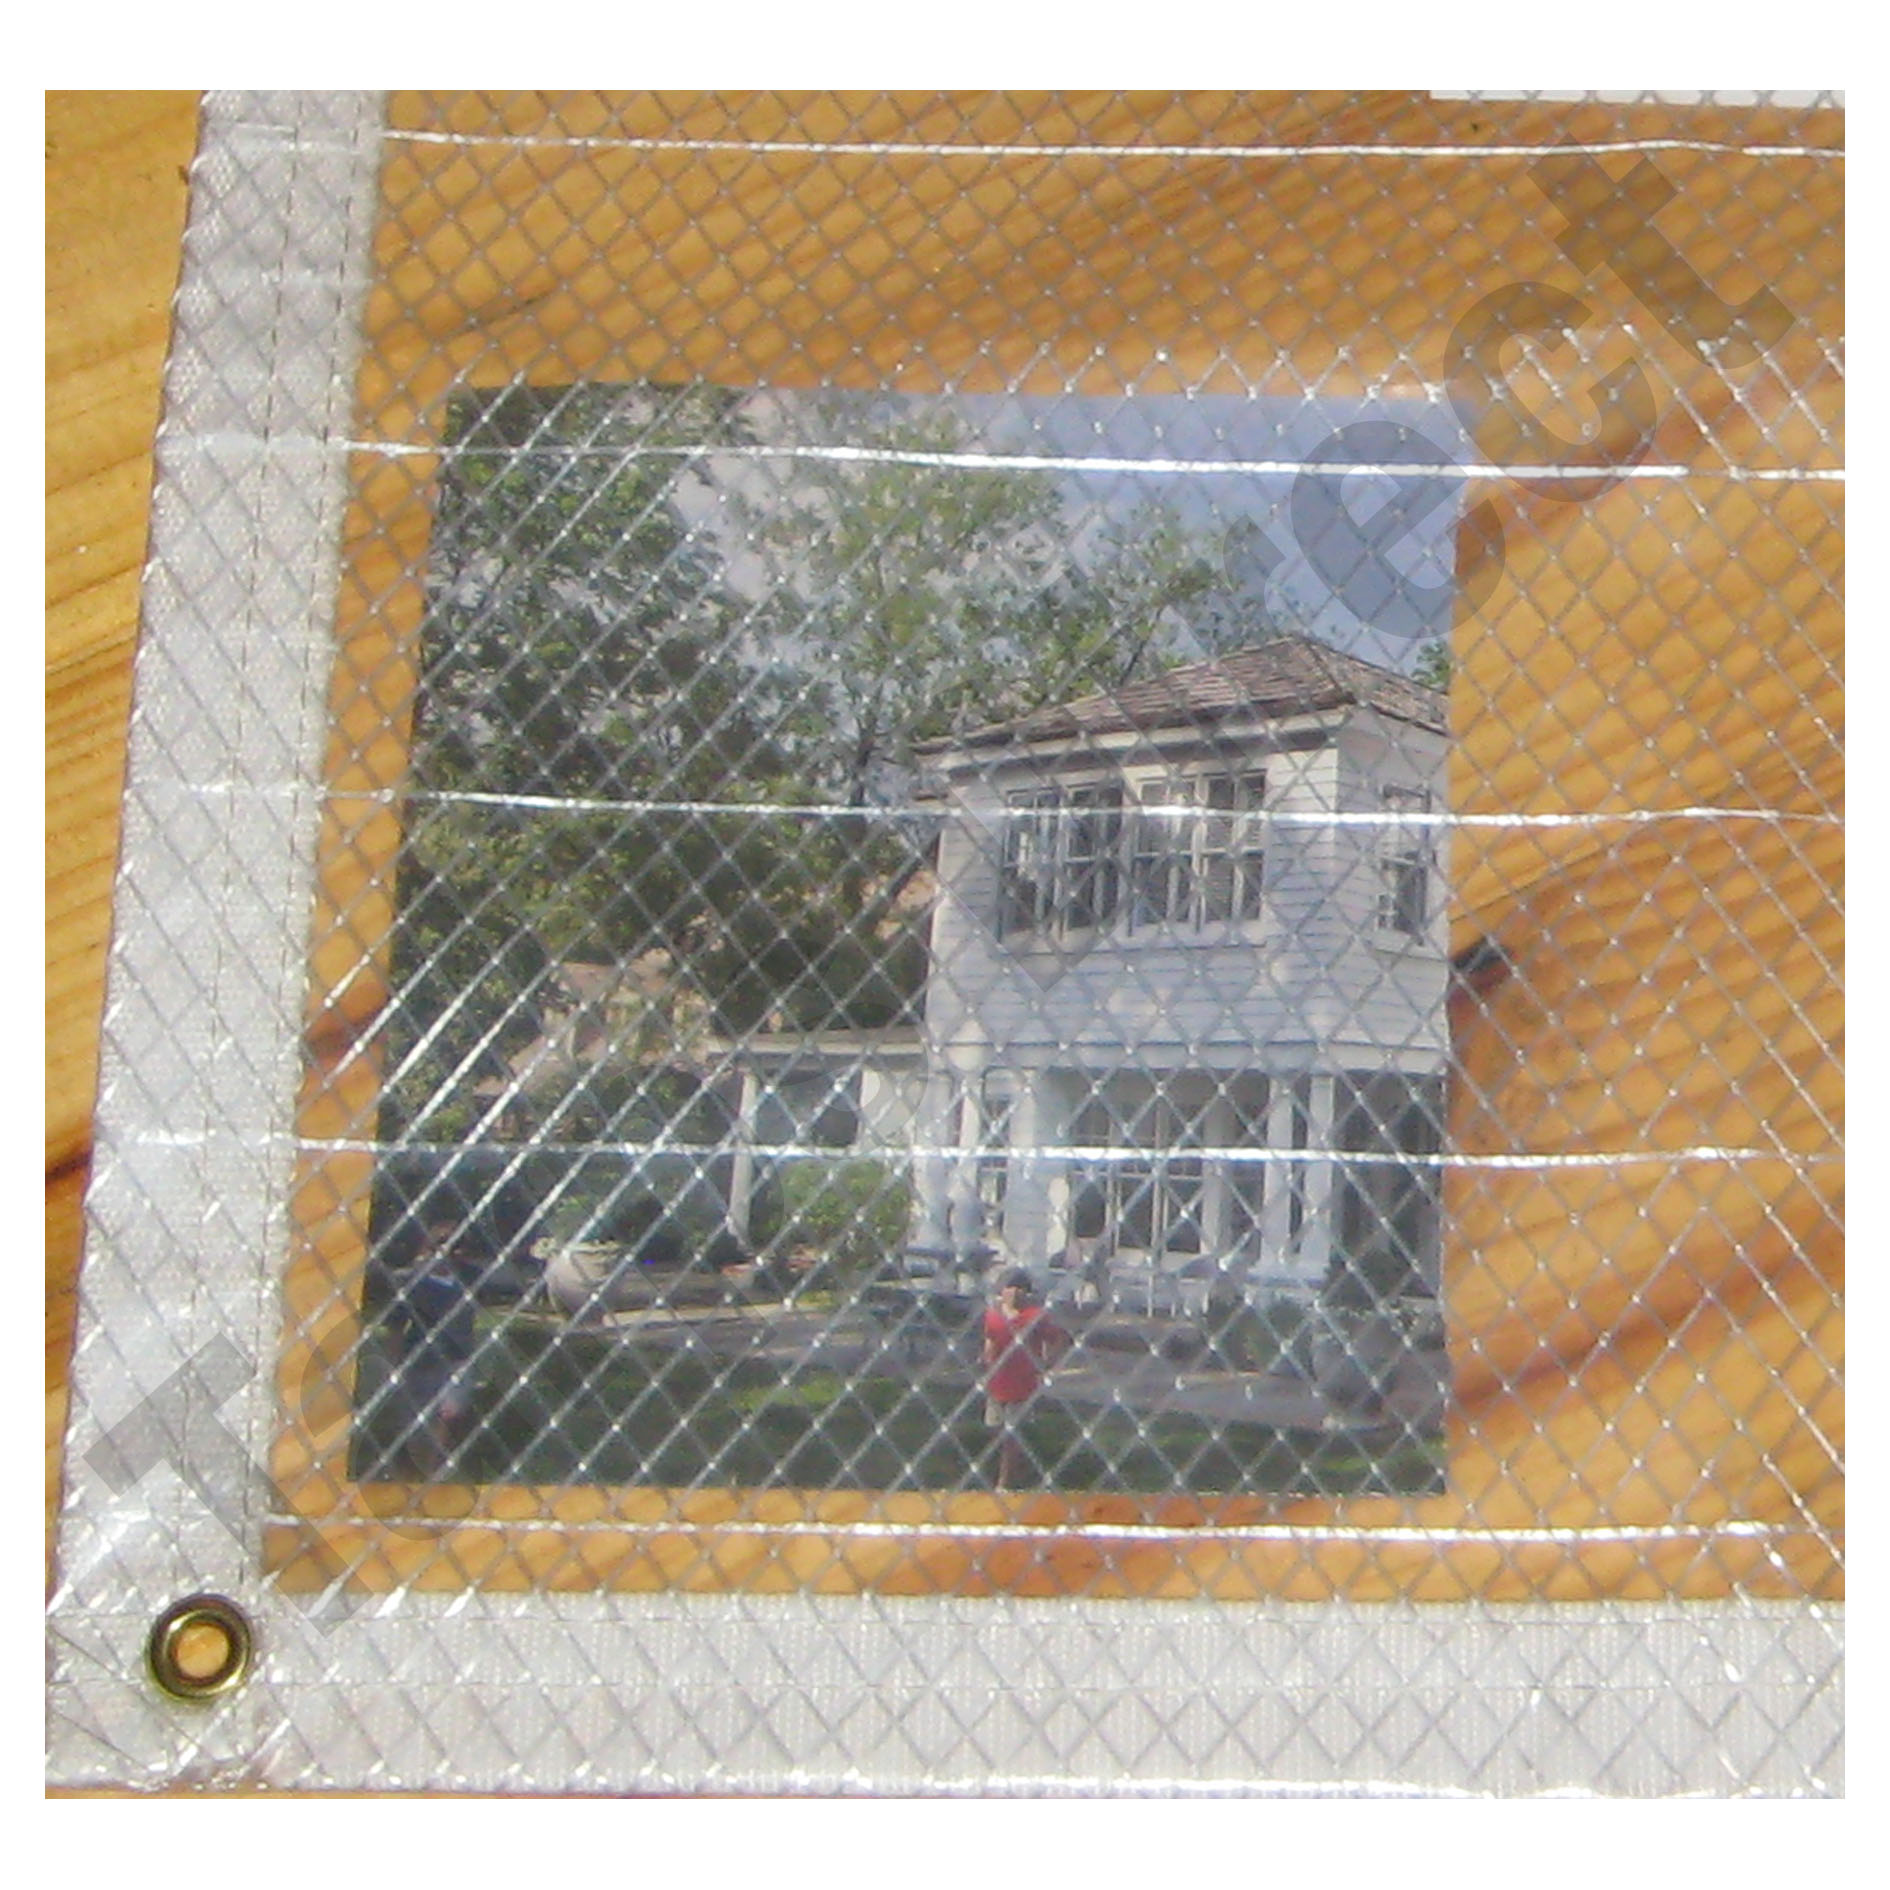 8 ft x 12 ft Clear Poly Tarp MADE IN USA  7 Ounce  10 Mil Thick  Reinforced Scrim Porch Patio Enclosure Cover Vapor Barrier